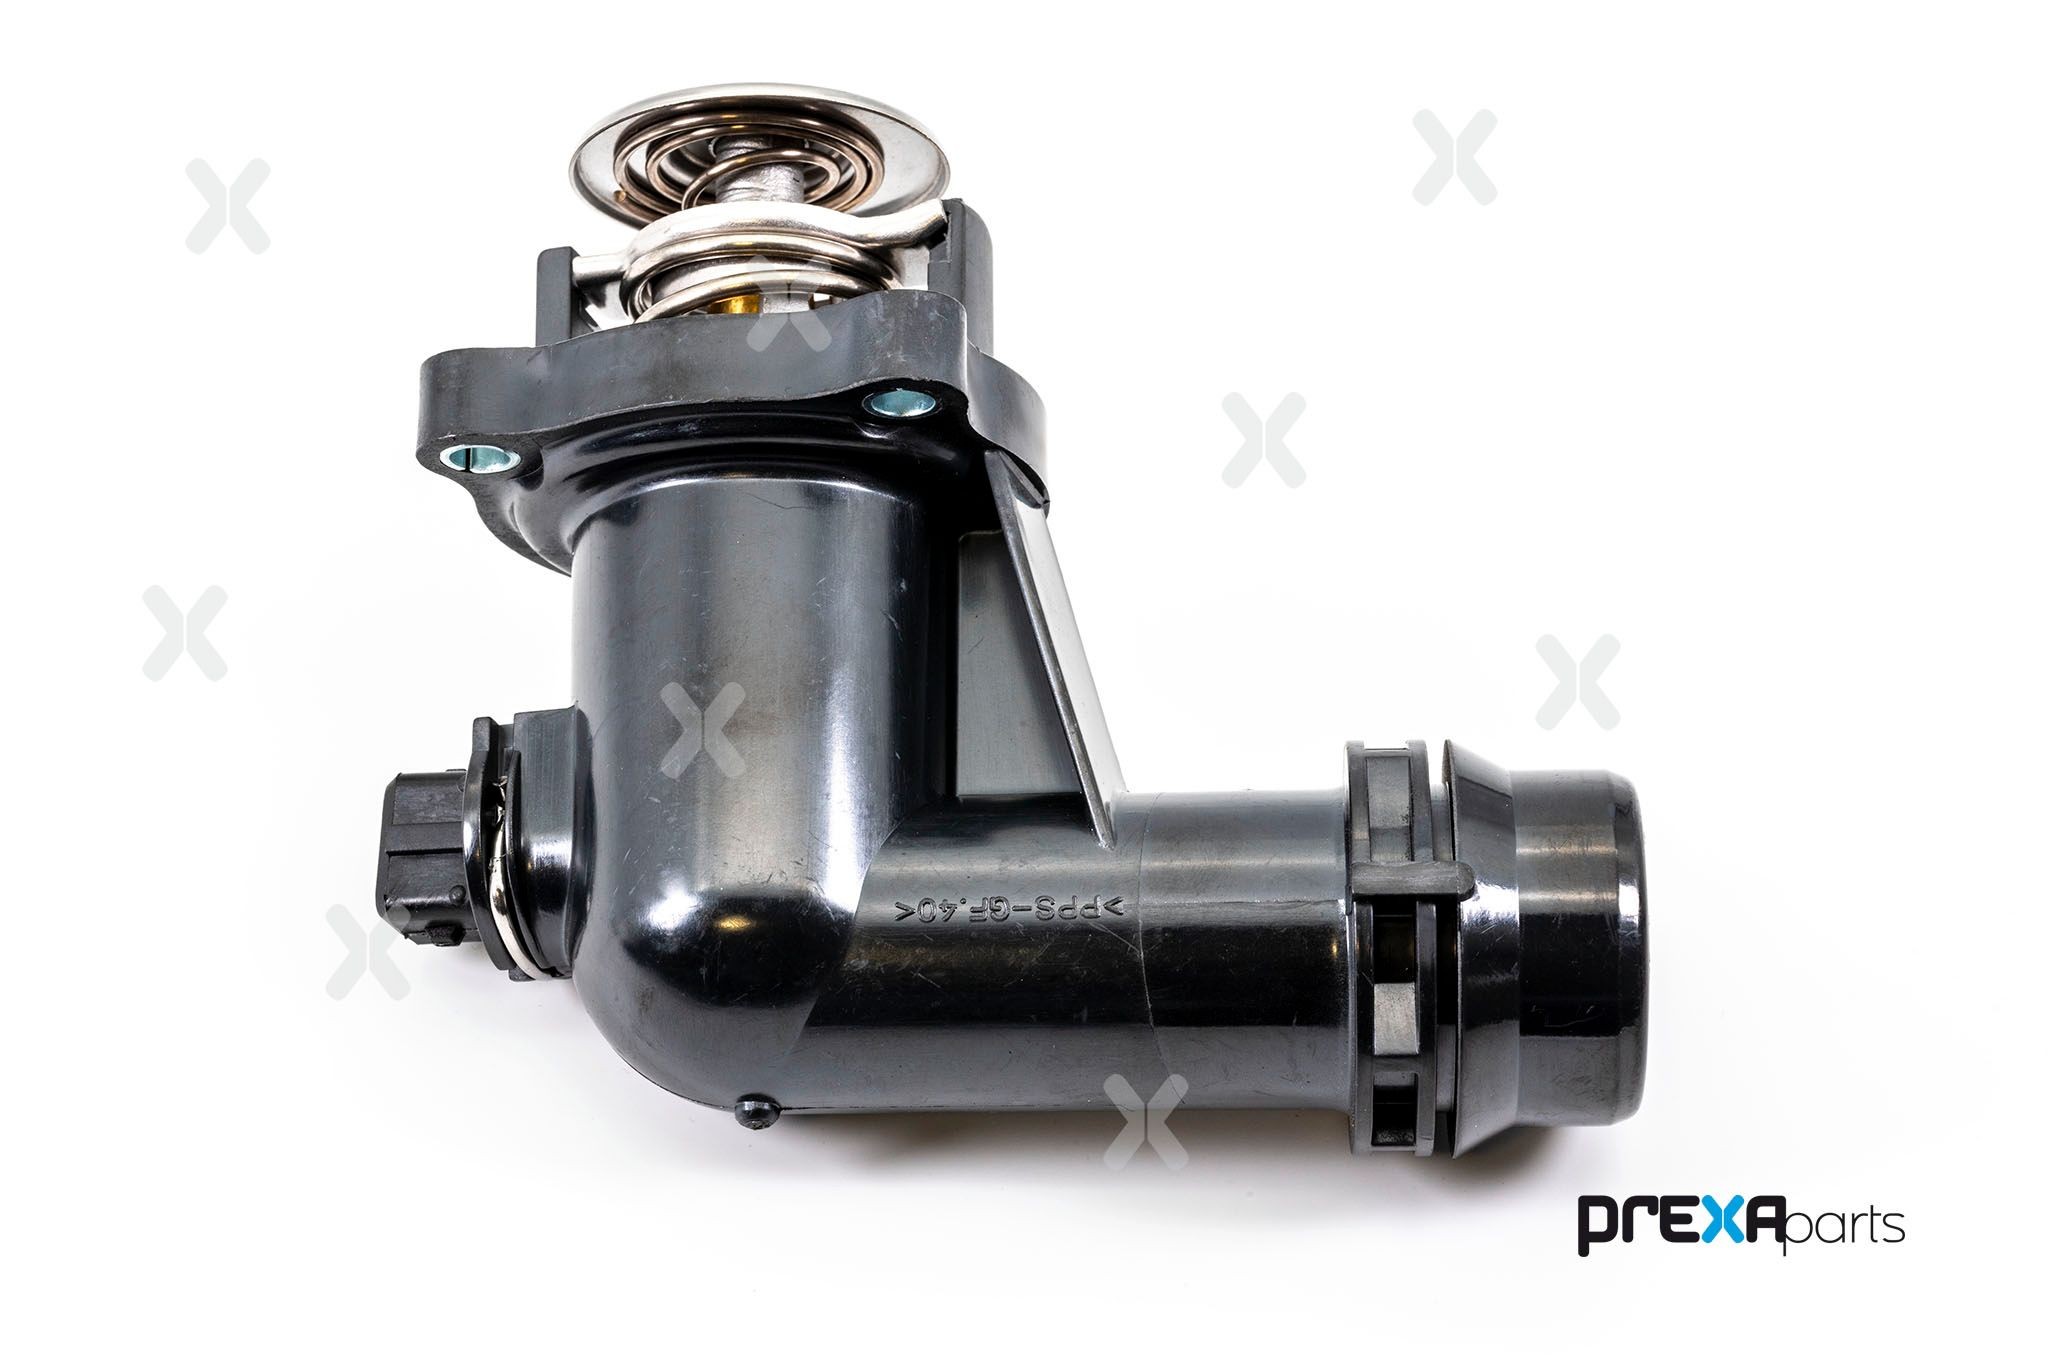 PREXAparts P207004 Thermostat in engine cooling system Opening Temperature: 105°C